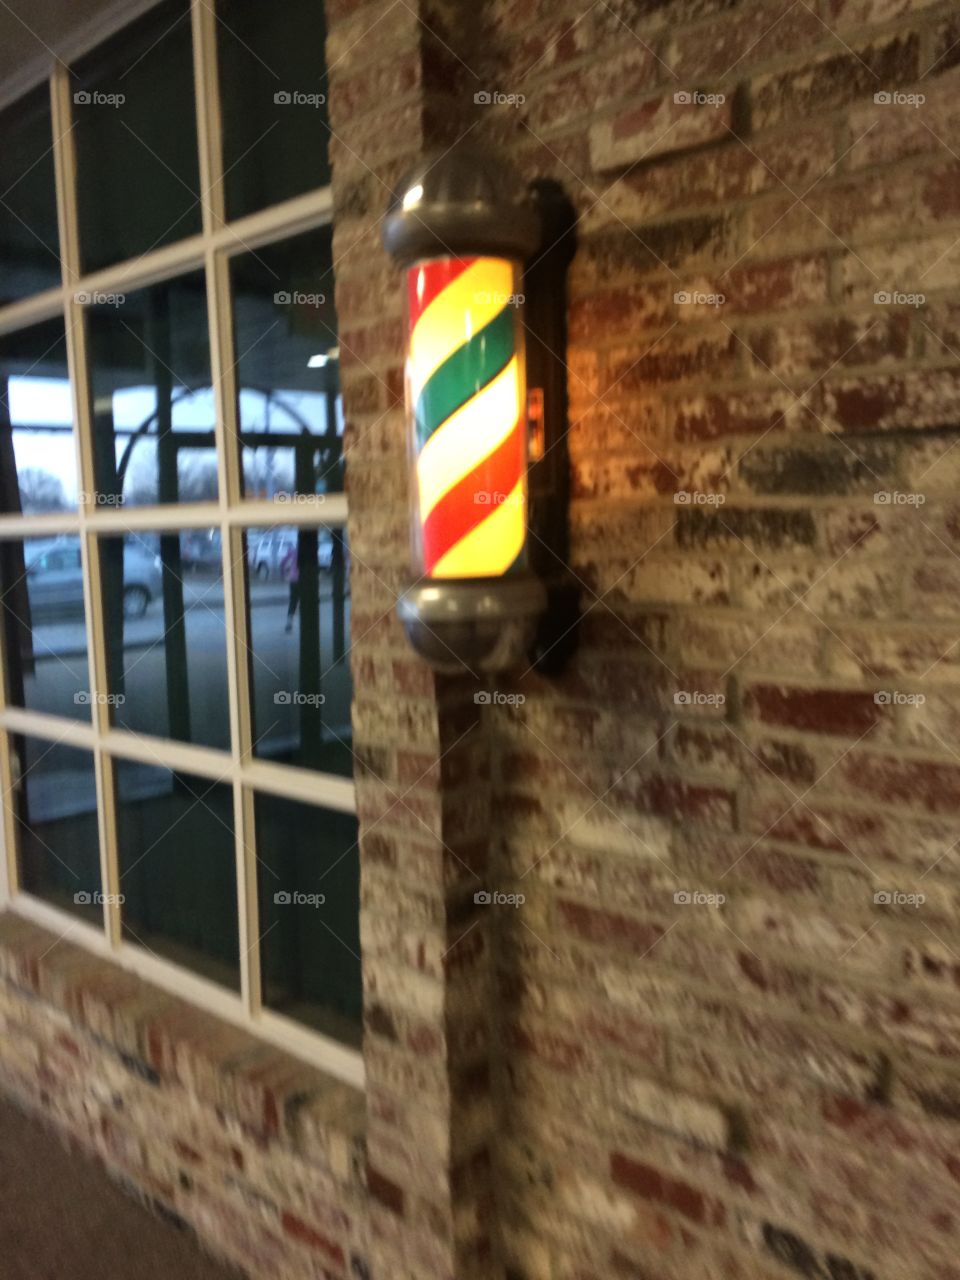 Barber shop
Candy Cain 
Wall
Brick
Red
White 
Blue